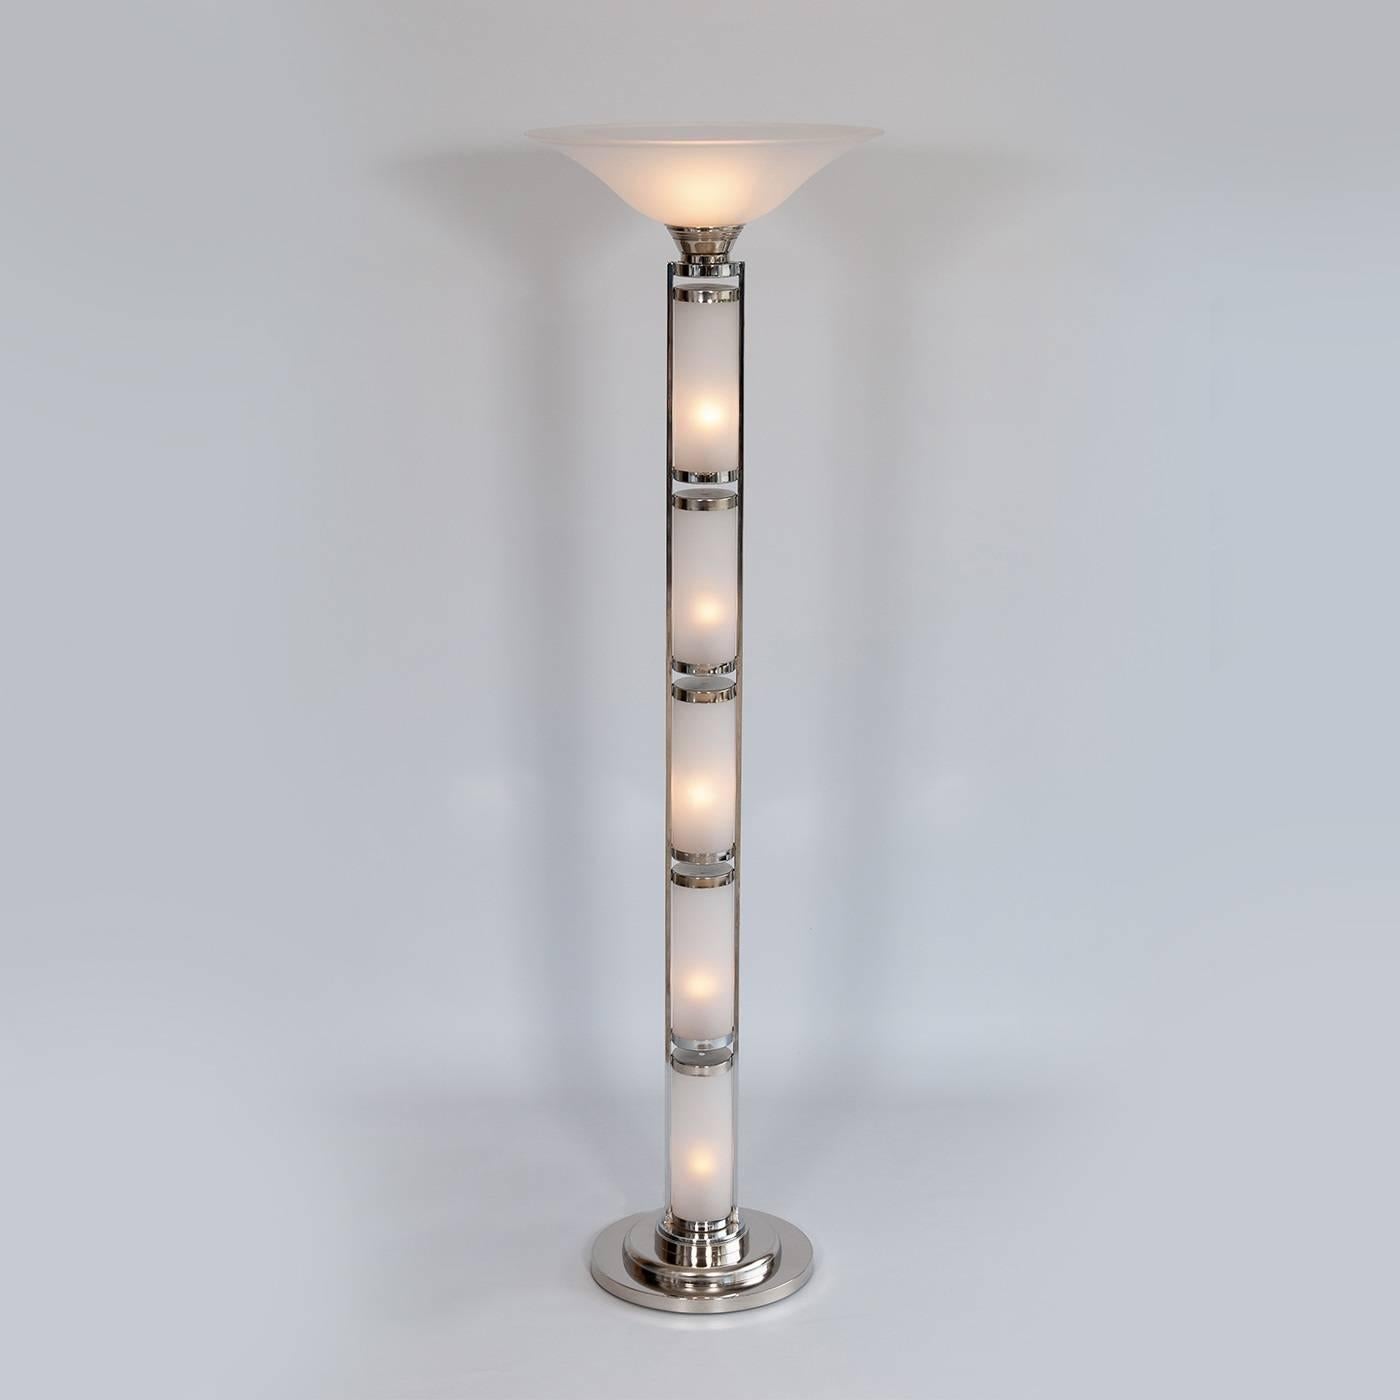 This exquisite floor lamp features a linear construction which is composed of four opaque Murano glass cylinders and a tapered conic top element. Each one of the cylinders hold a single light, and an additional light adorns the top of the piece. The